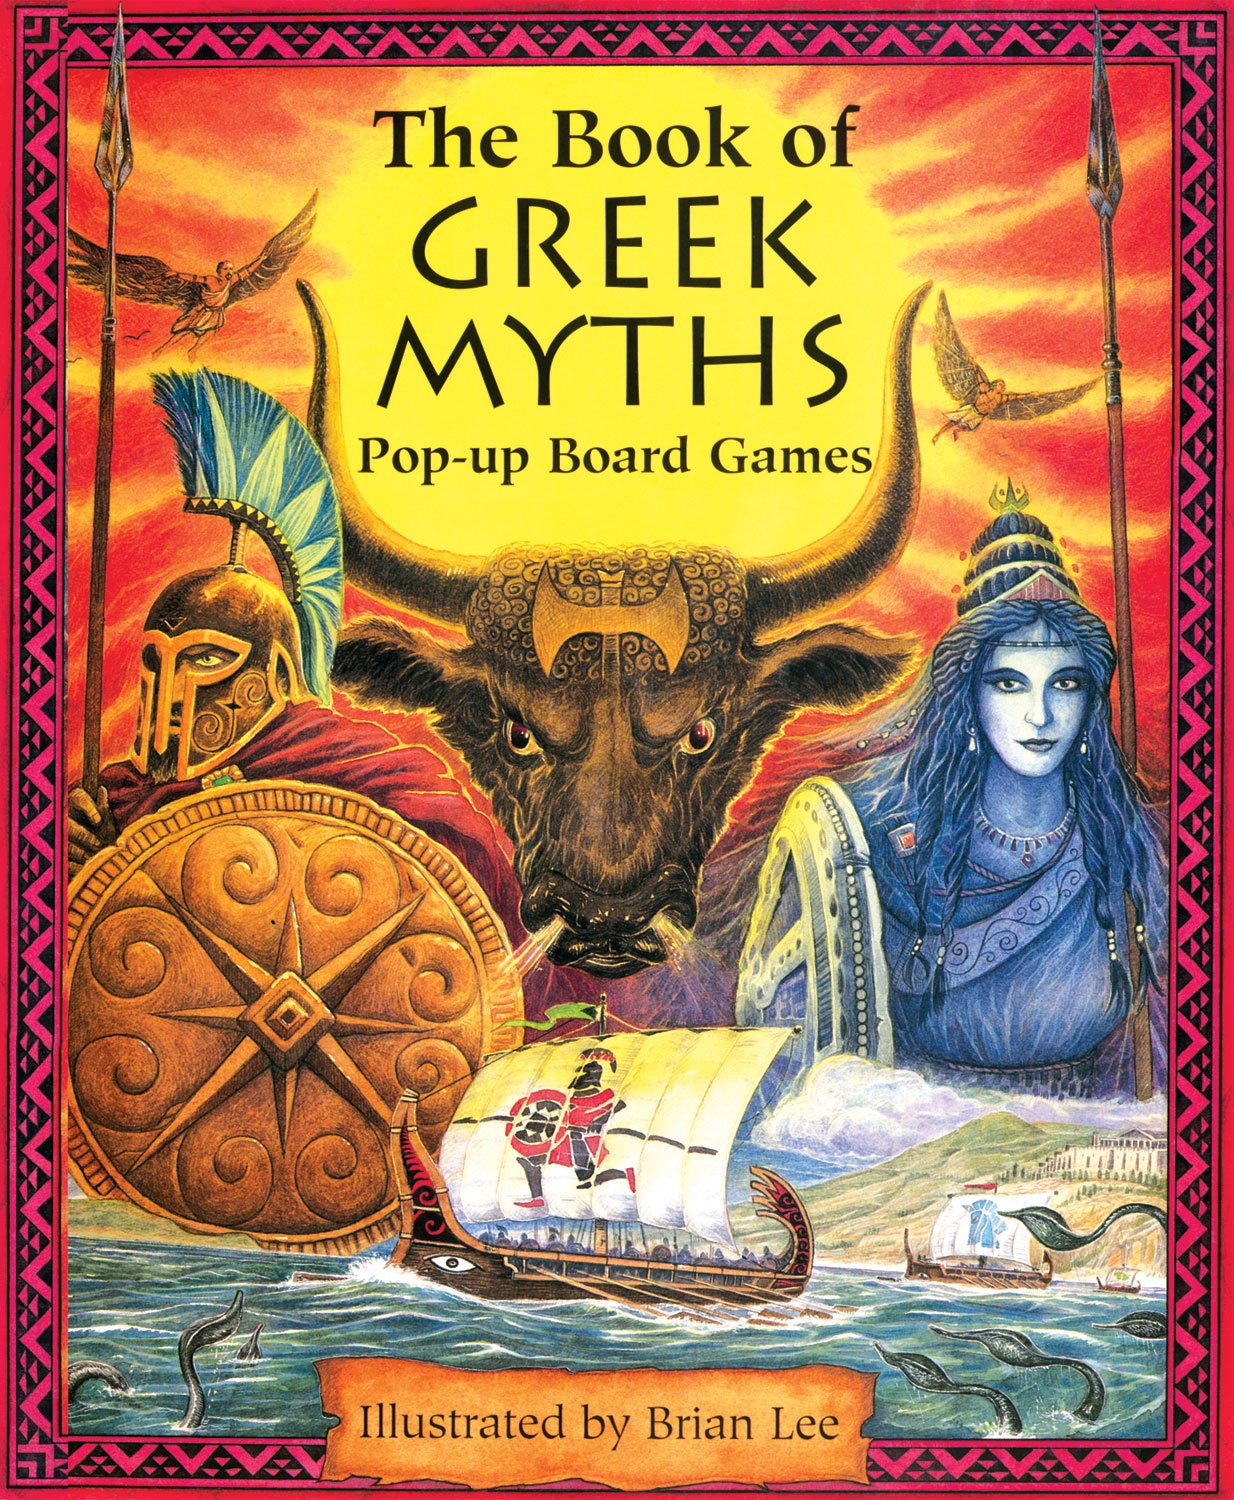 The Book of Greek Myths. Pop-up Board Games | Brian Lee